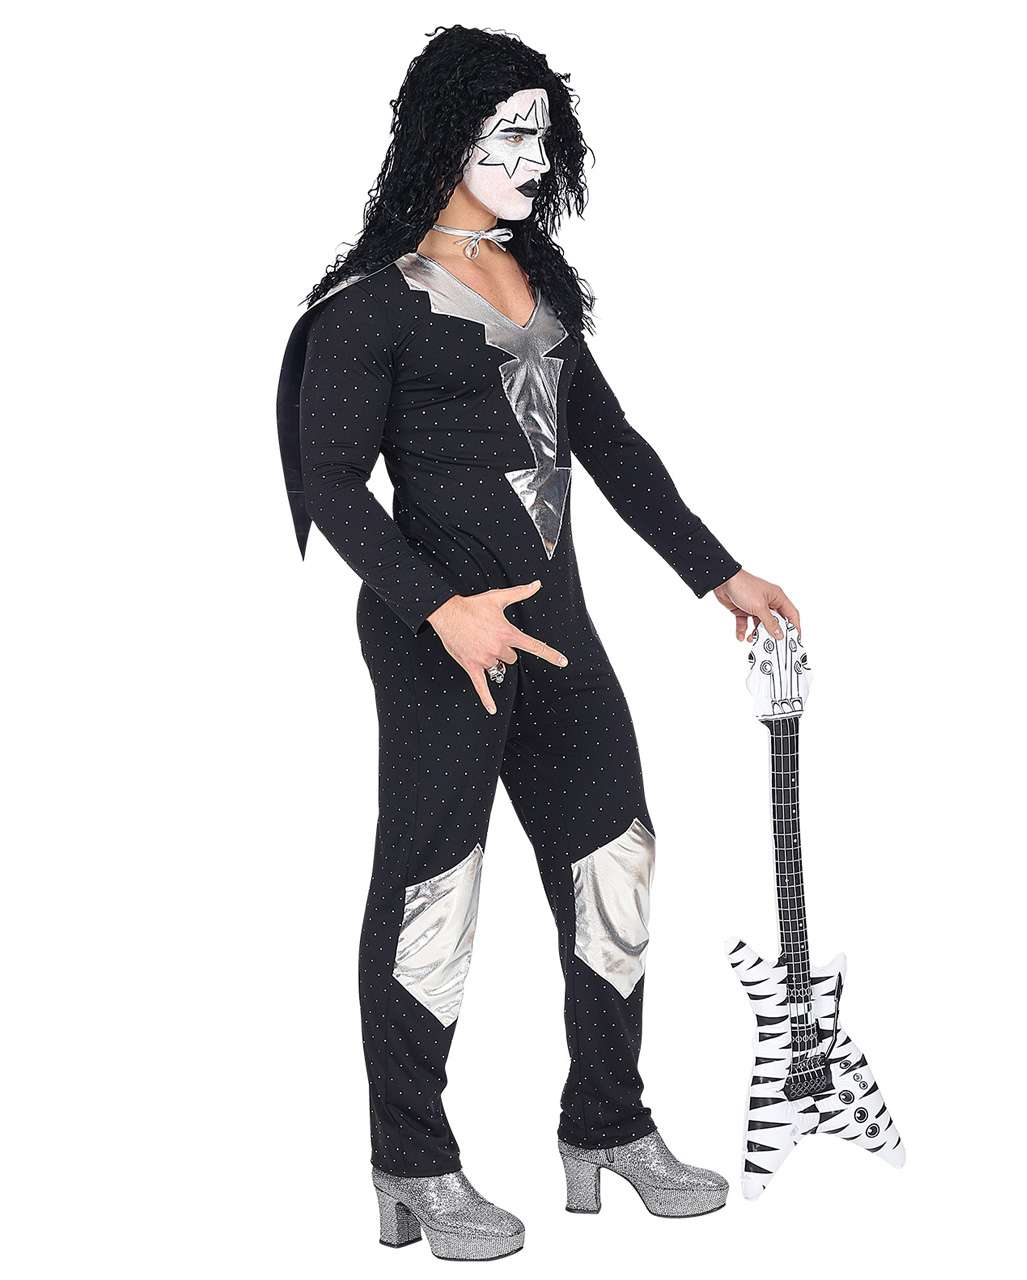 Dress Up & Pretend Play Goth Rock Star Costume Small Costumes.